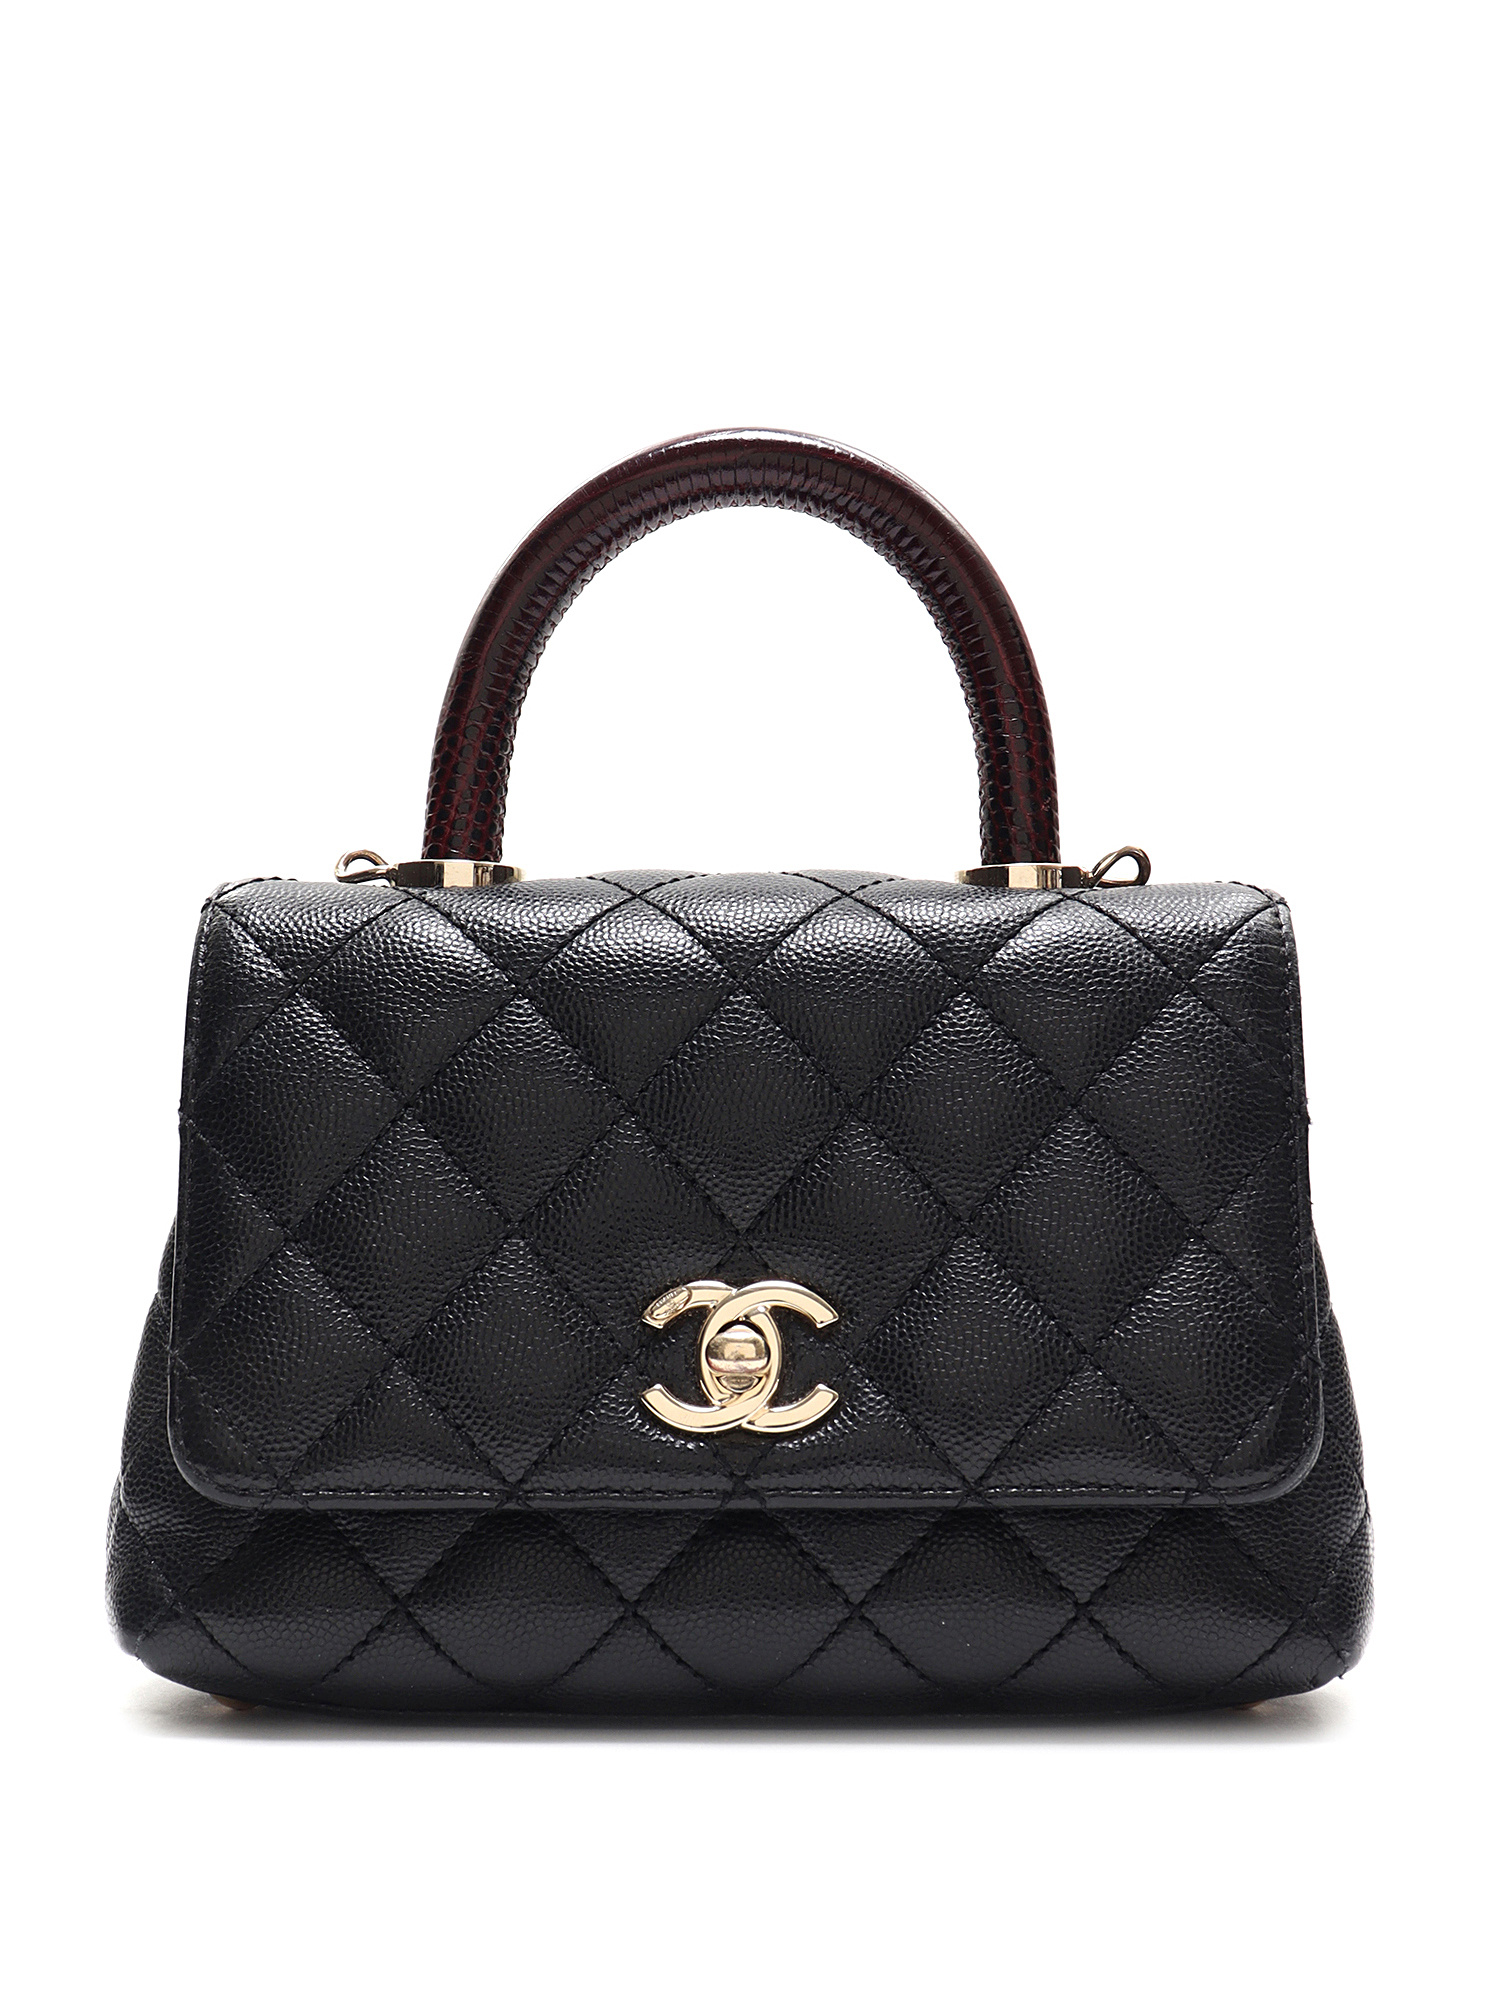 CHANEL Quilted Caviar Leather Flap Bag